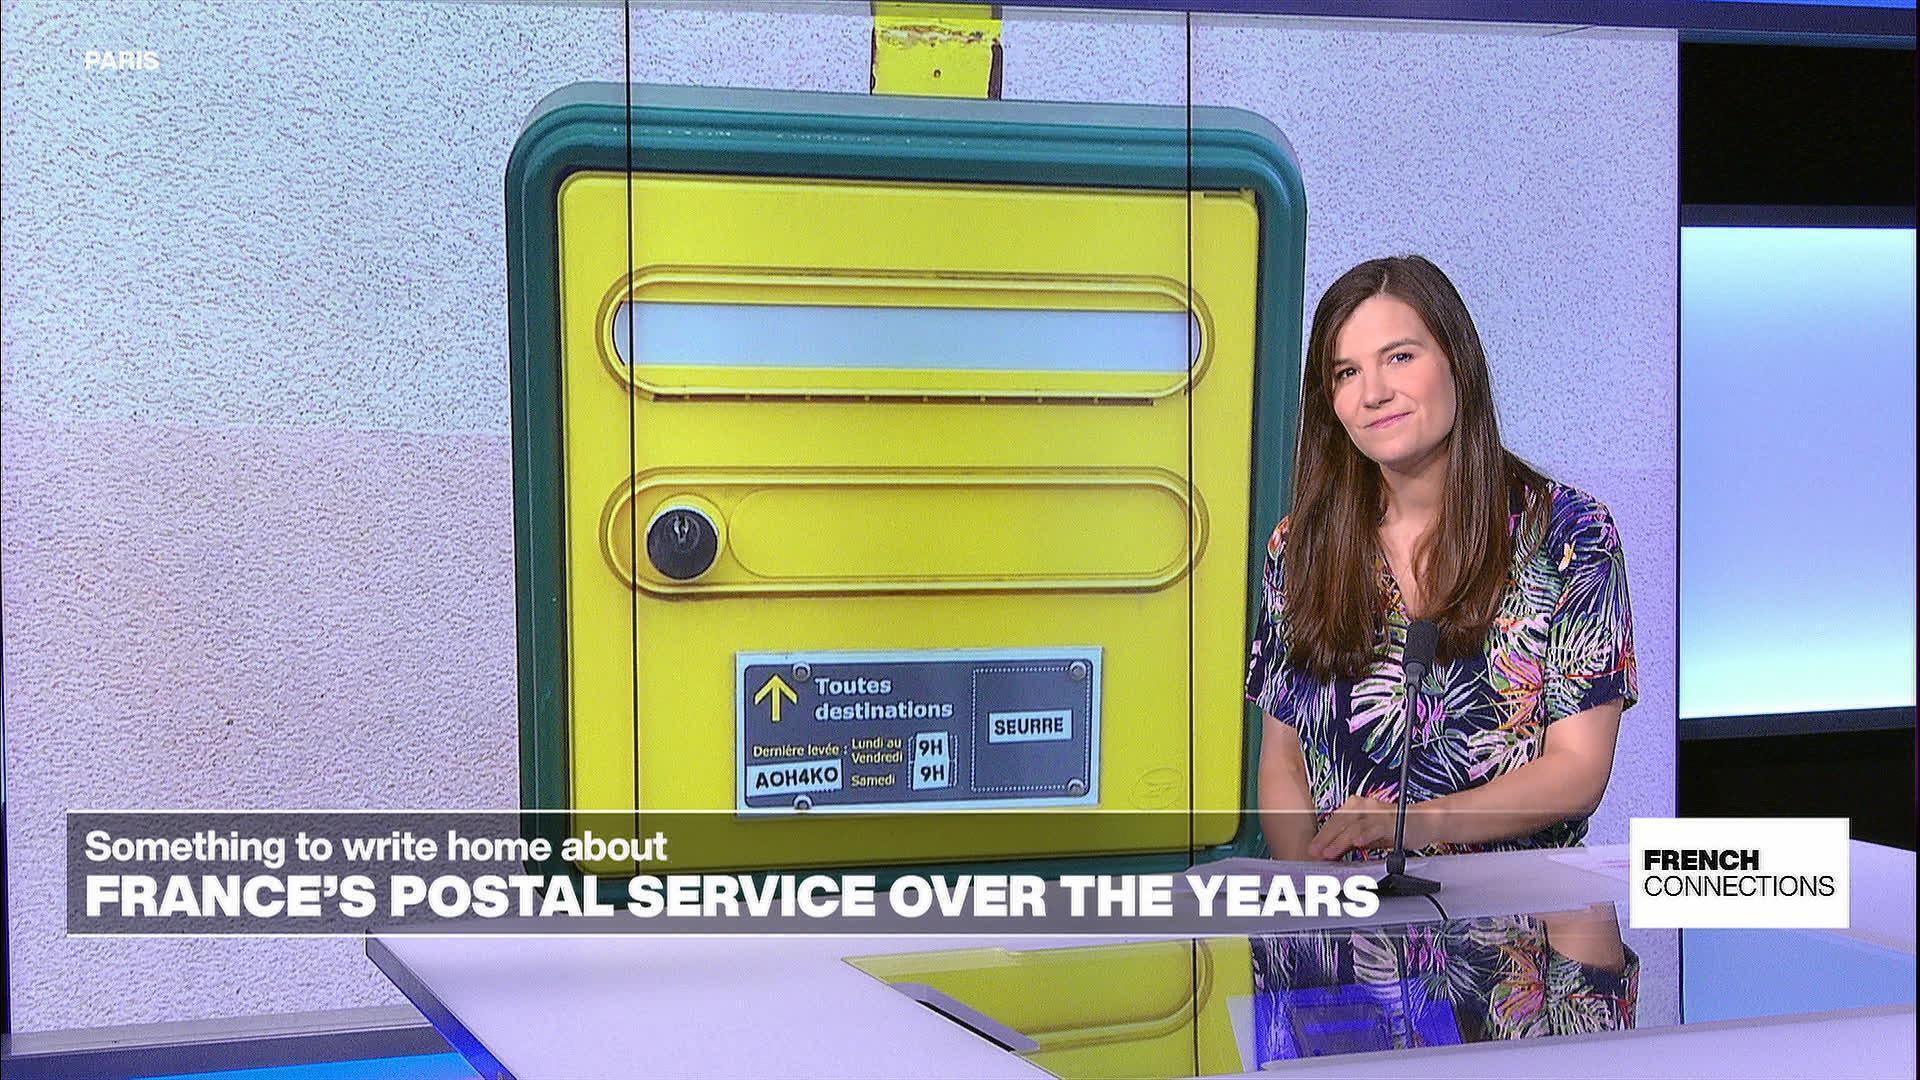 The ins and outs of 'La Poste': How France's postal service has adapted to change